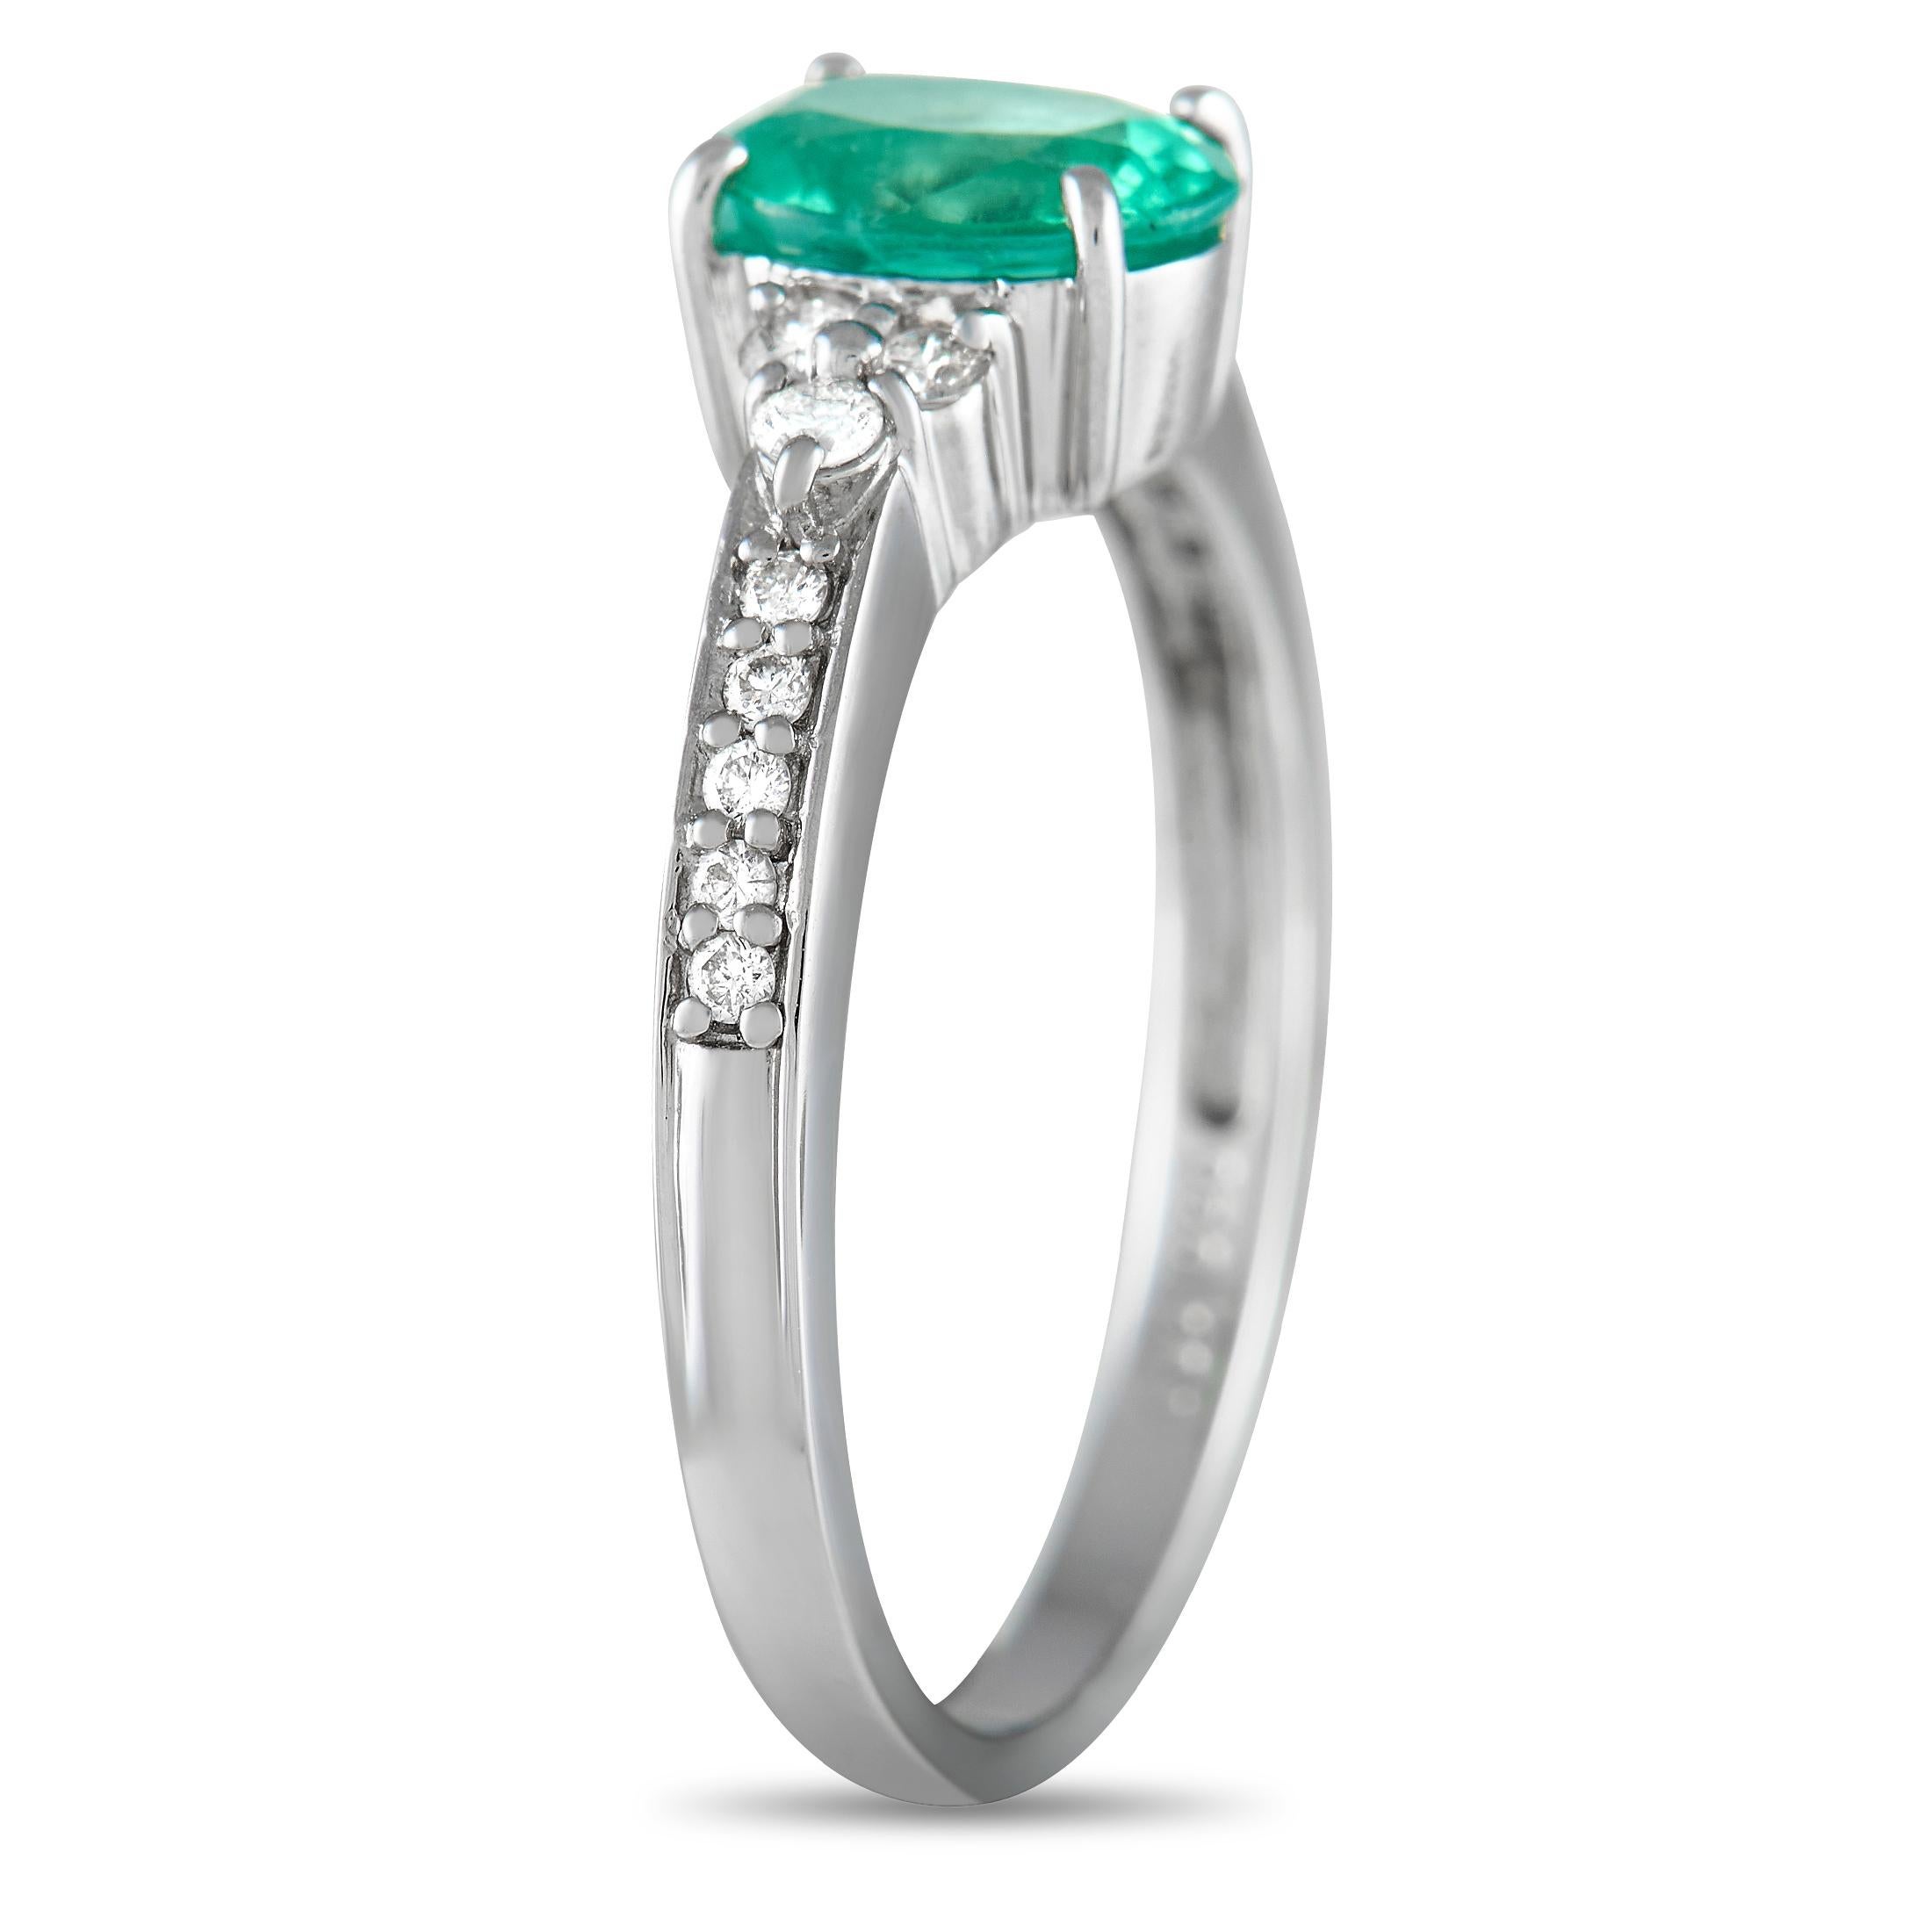 There’s something simple, elegant, and understated about this luxury ring. Sparkling diamonds with a total weight of 0.20 carats accent the 1mm wide Platinum band, highlighting the beauty of the 1.08 carat oval-shaped Emerald center stone. This